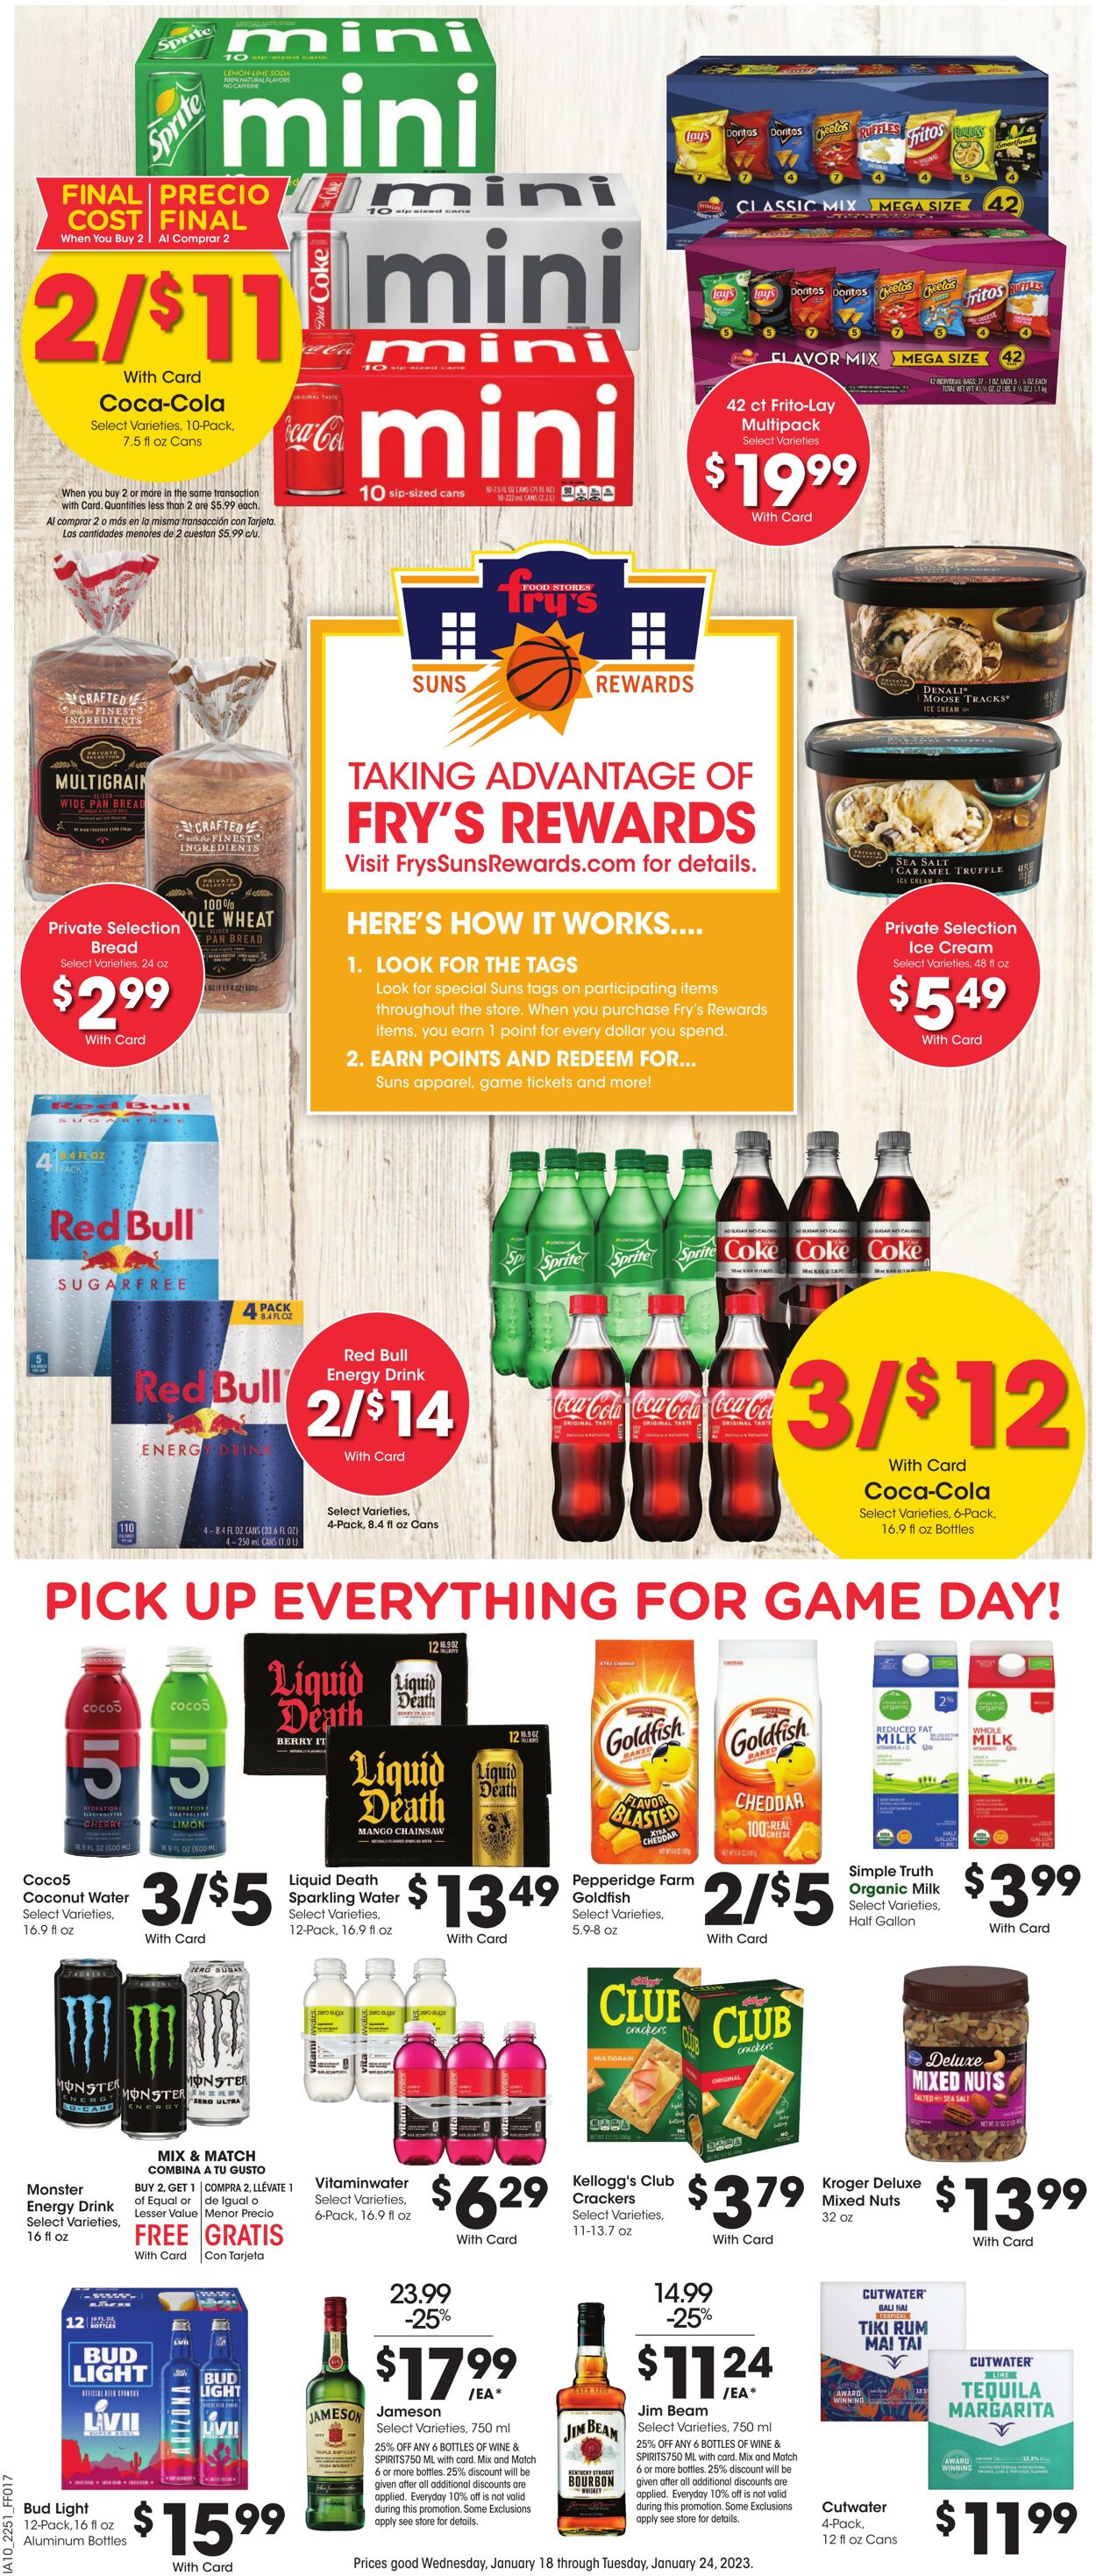 Weekly ad Fry's 01/18/2023 - 01/24/2023